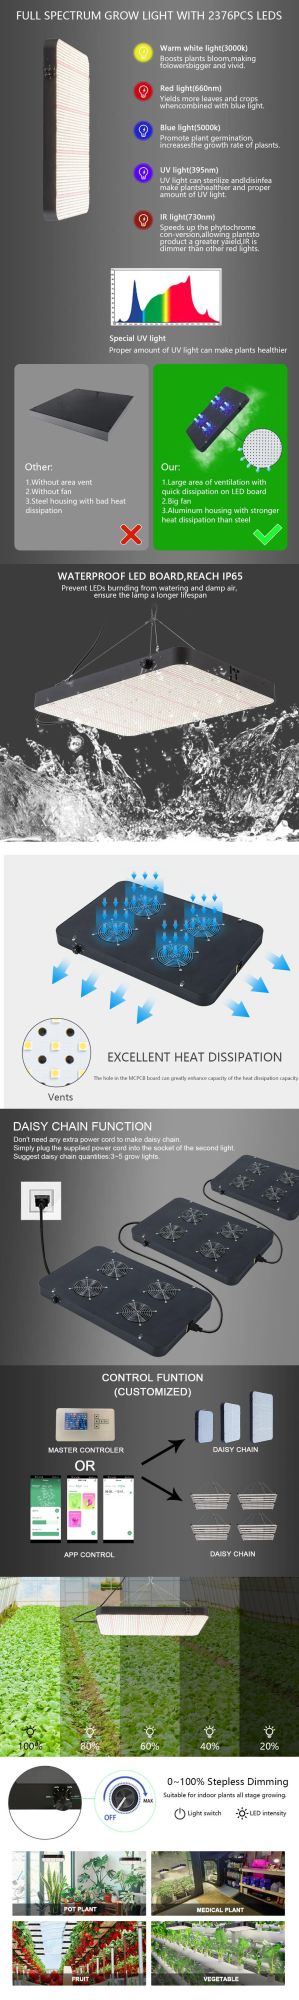 Full Spectrum Hydroponic Waterproof Daisy Chain Function 600W 0-100% Dimmable High Power Indoor Plants LED Grow Light with CE, FCC, RoHS